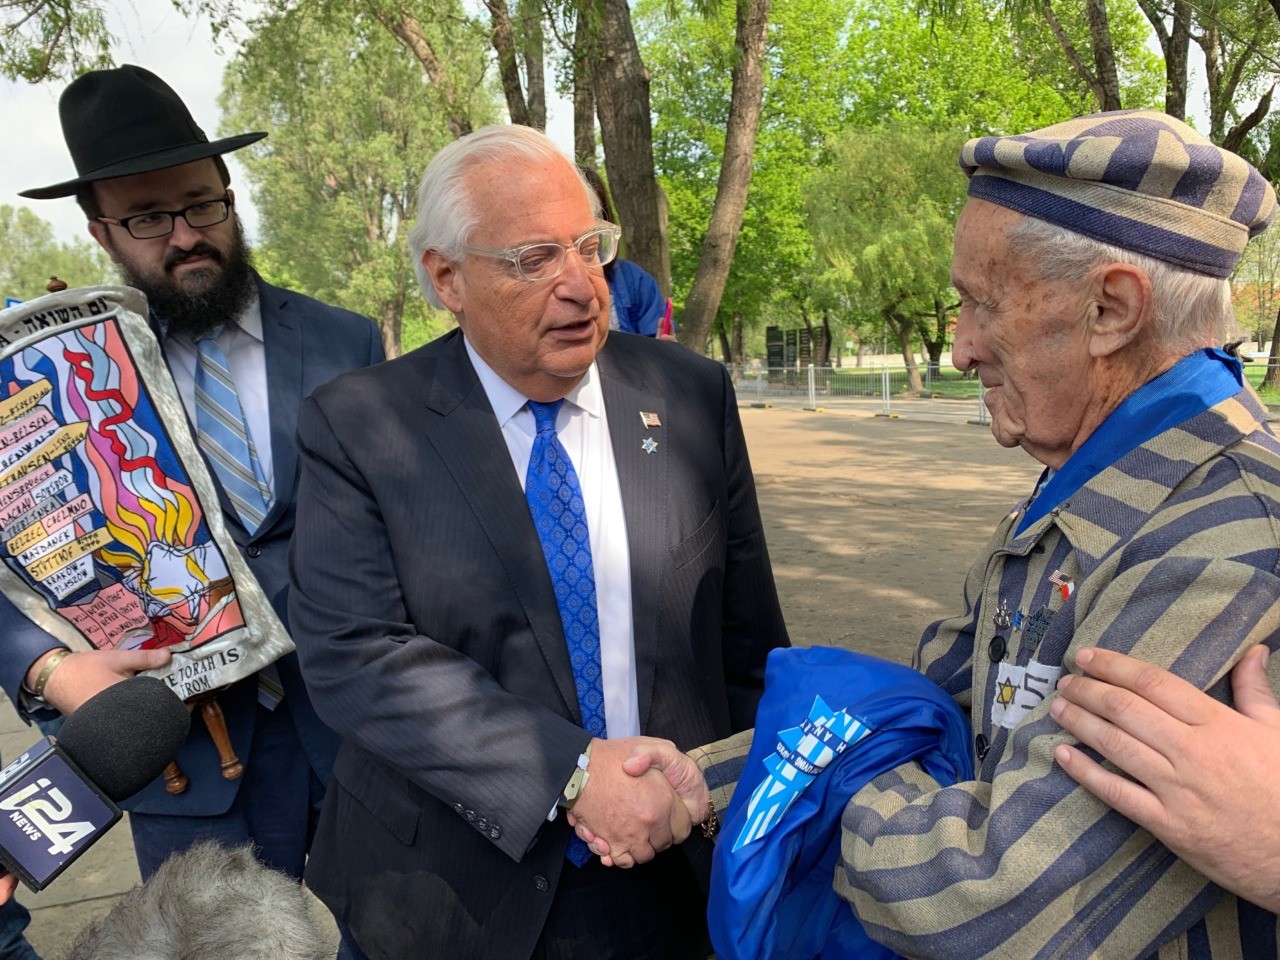 US Ambassador David Friedman greets Holocaust survivor Edward Mossberg, 93, who wears his original concentration camp uniform every year for the March of the Living and was awarded Poland’s Order of Merit yesterday